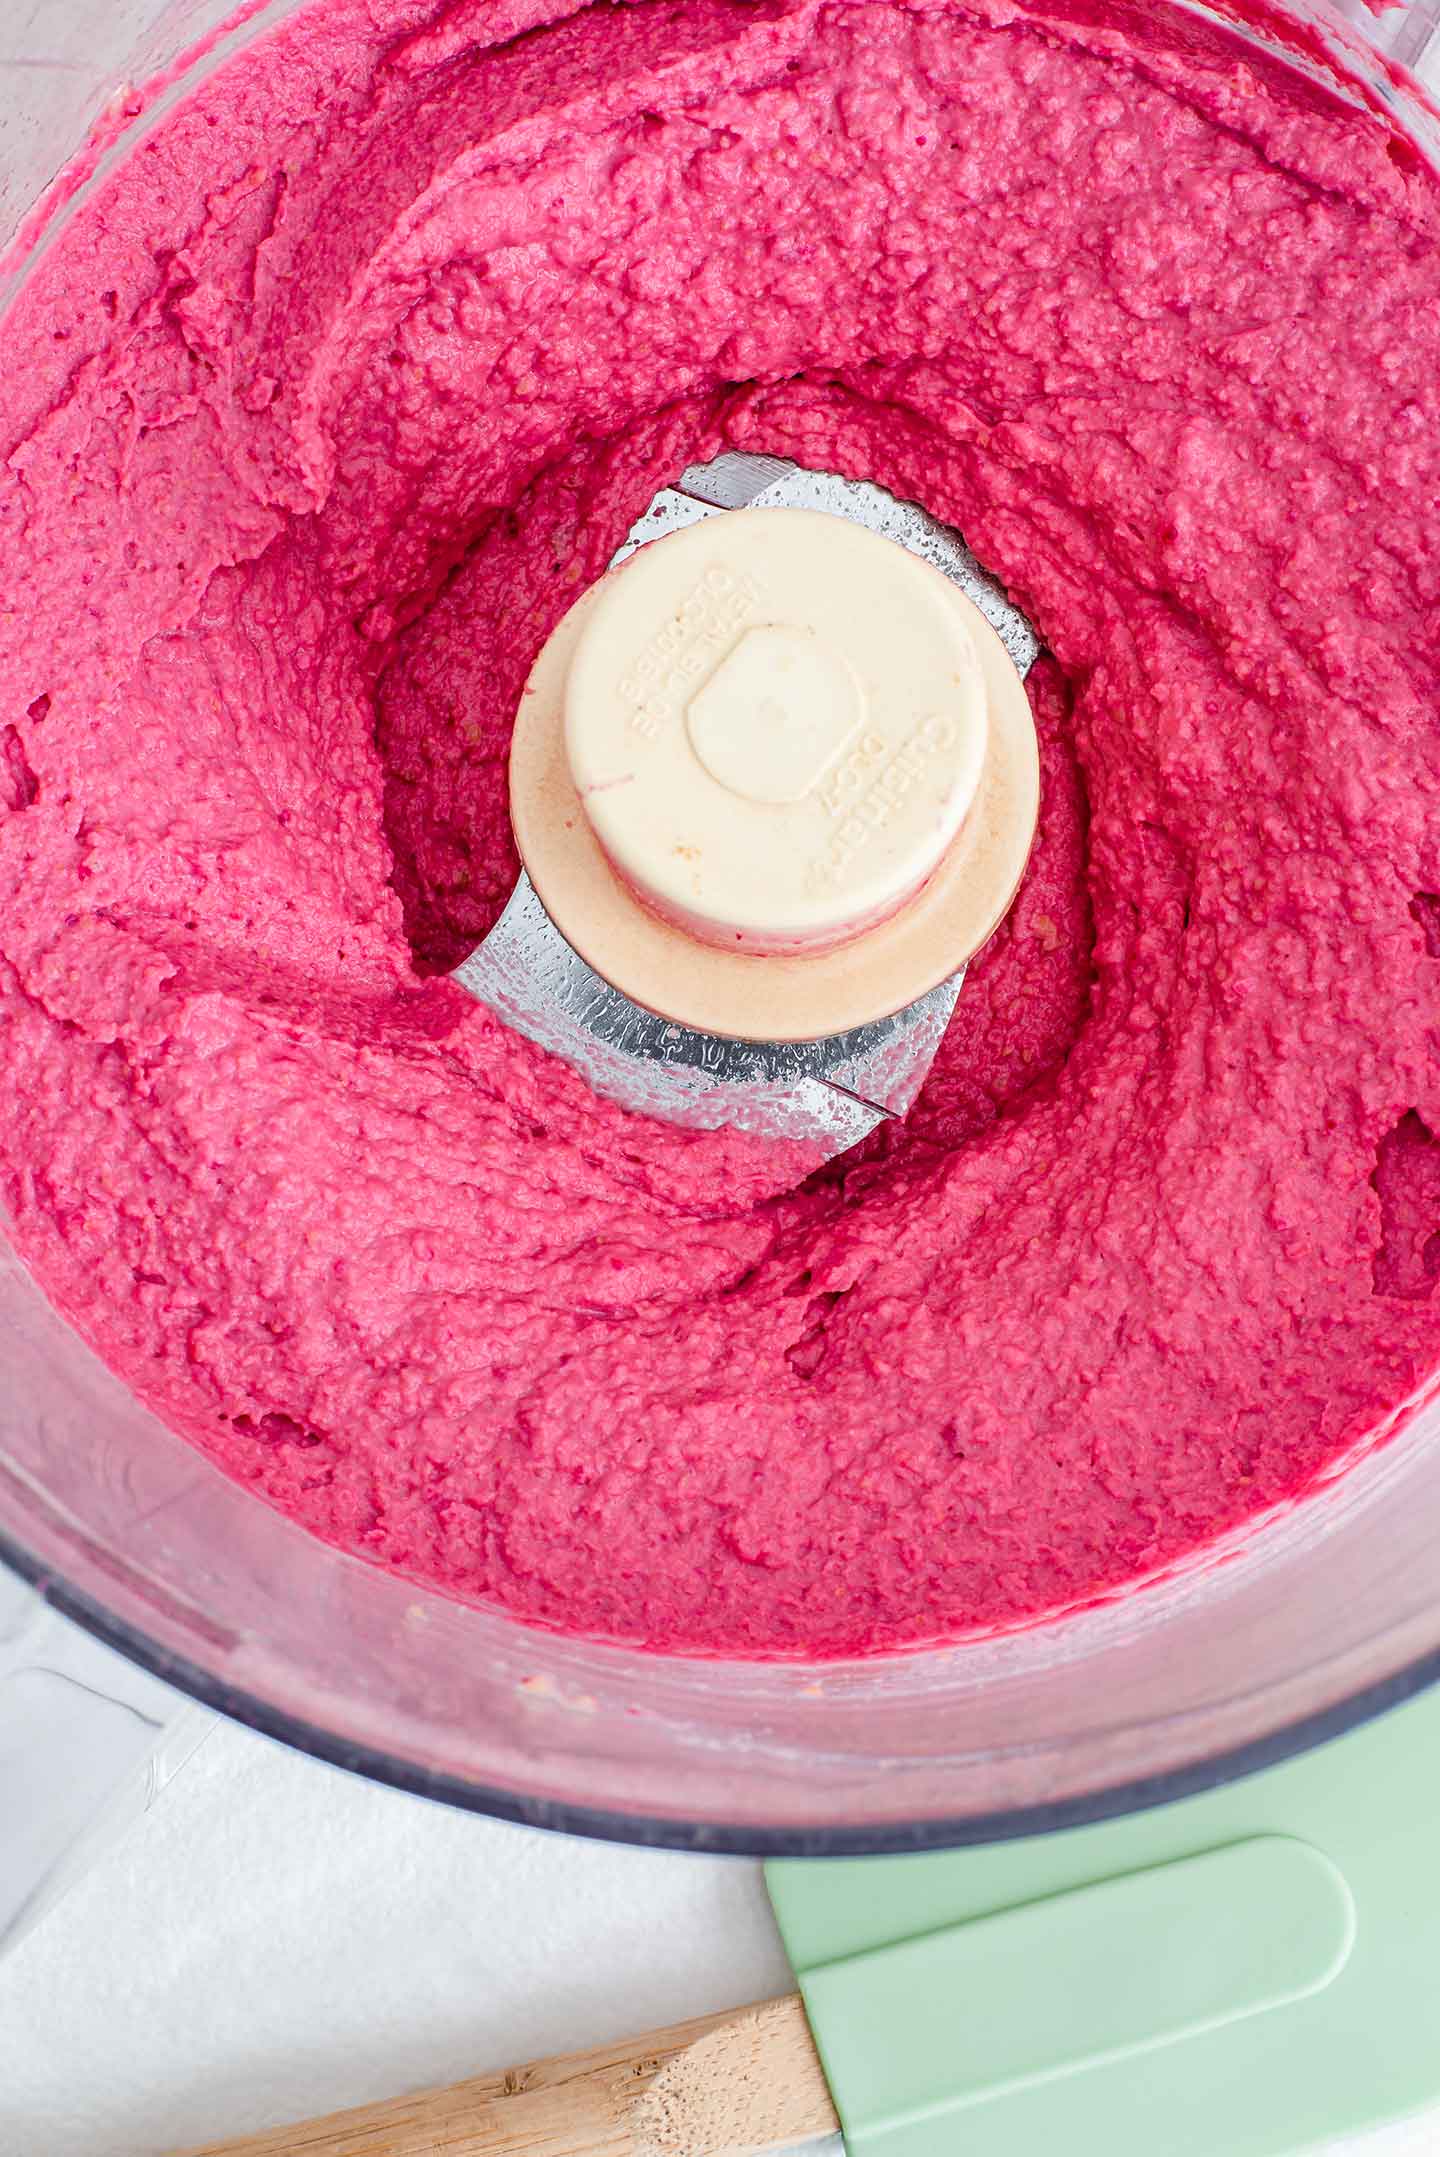 Top down view of bright pink hummus in the bowl of a food processor.